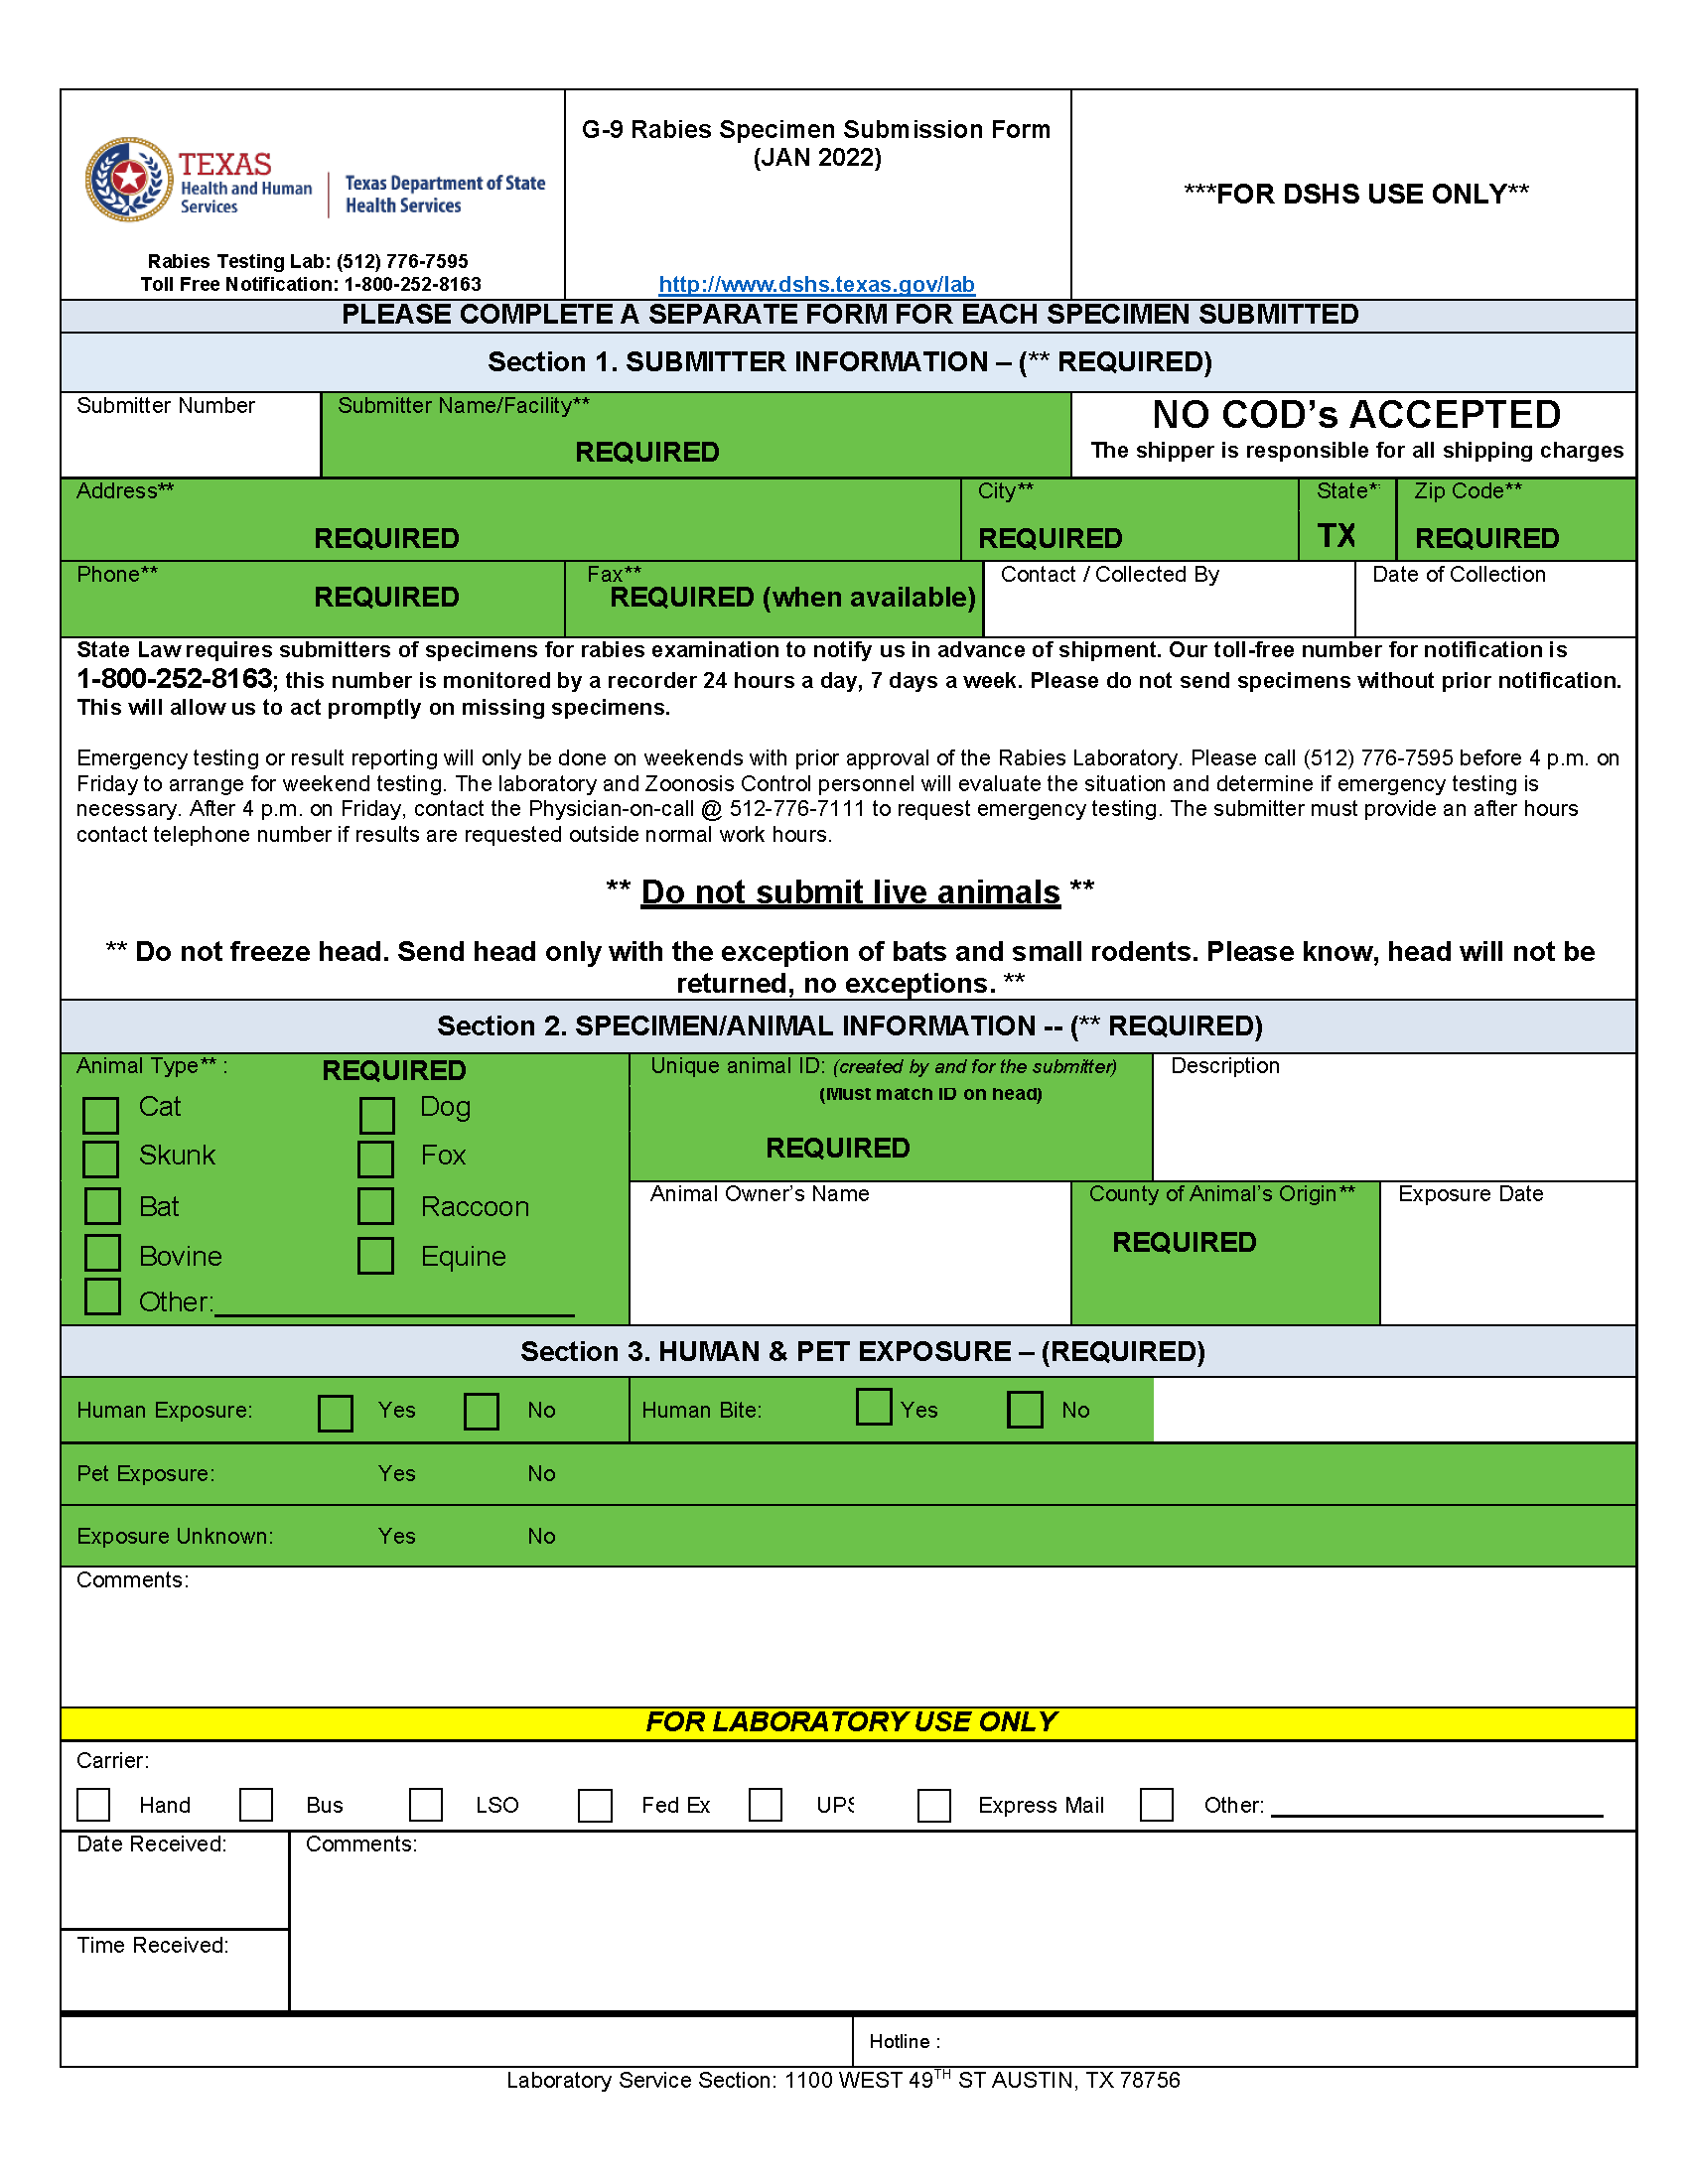 "G-9 Rabies Specimen Submission Form with required fields, sections 1, 2, and 3  highlighted in green. "